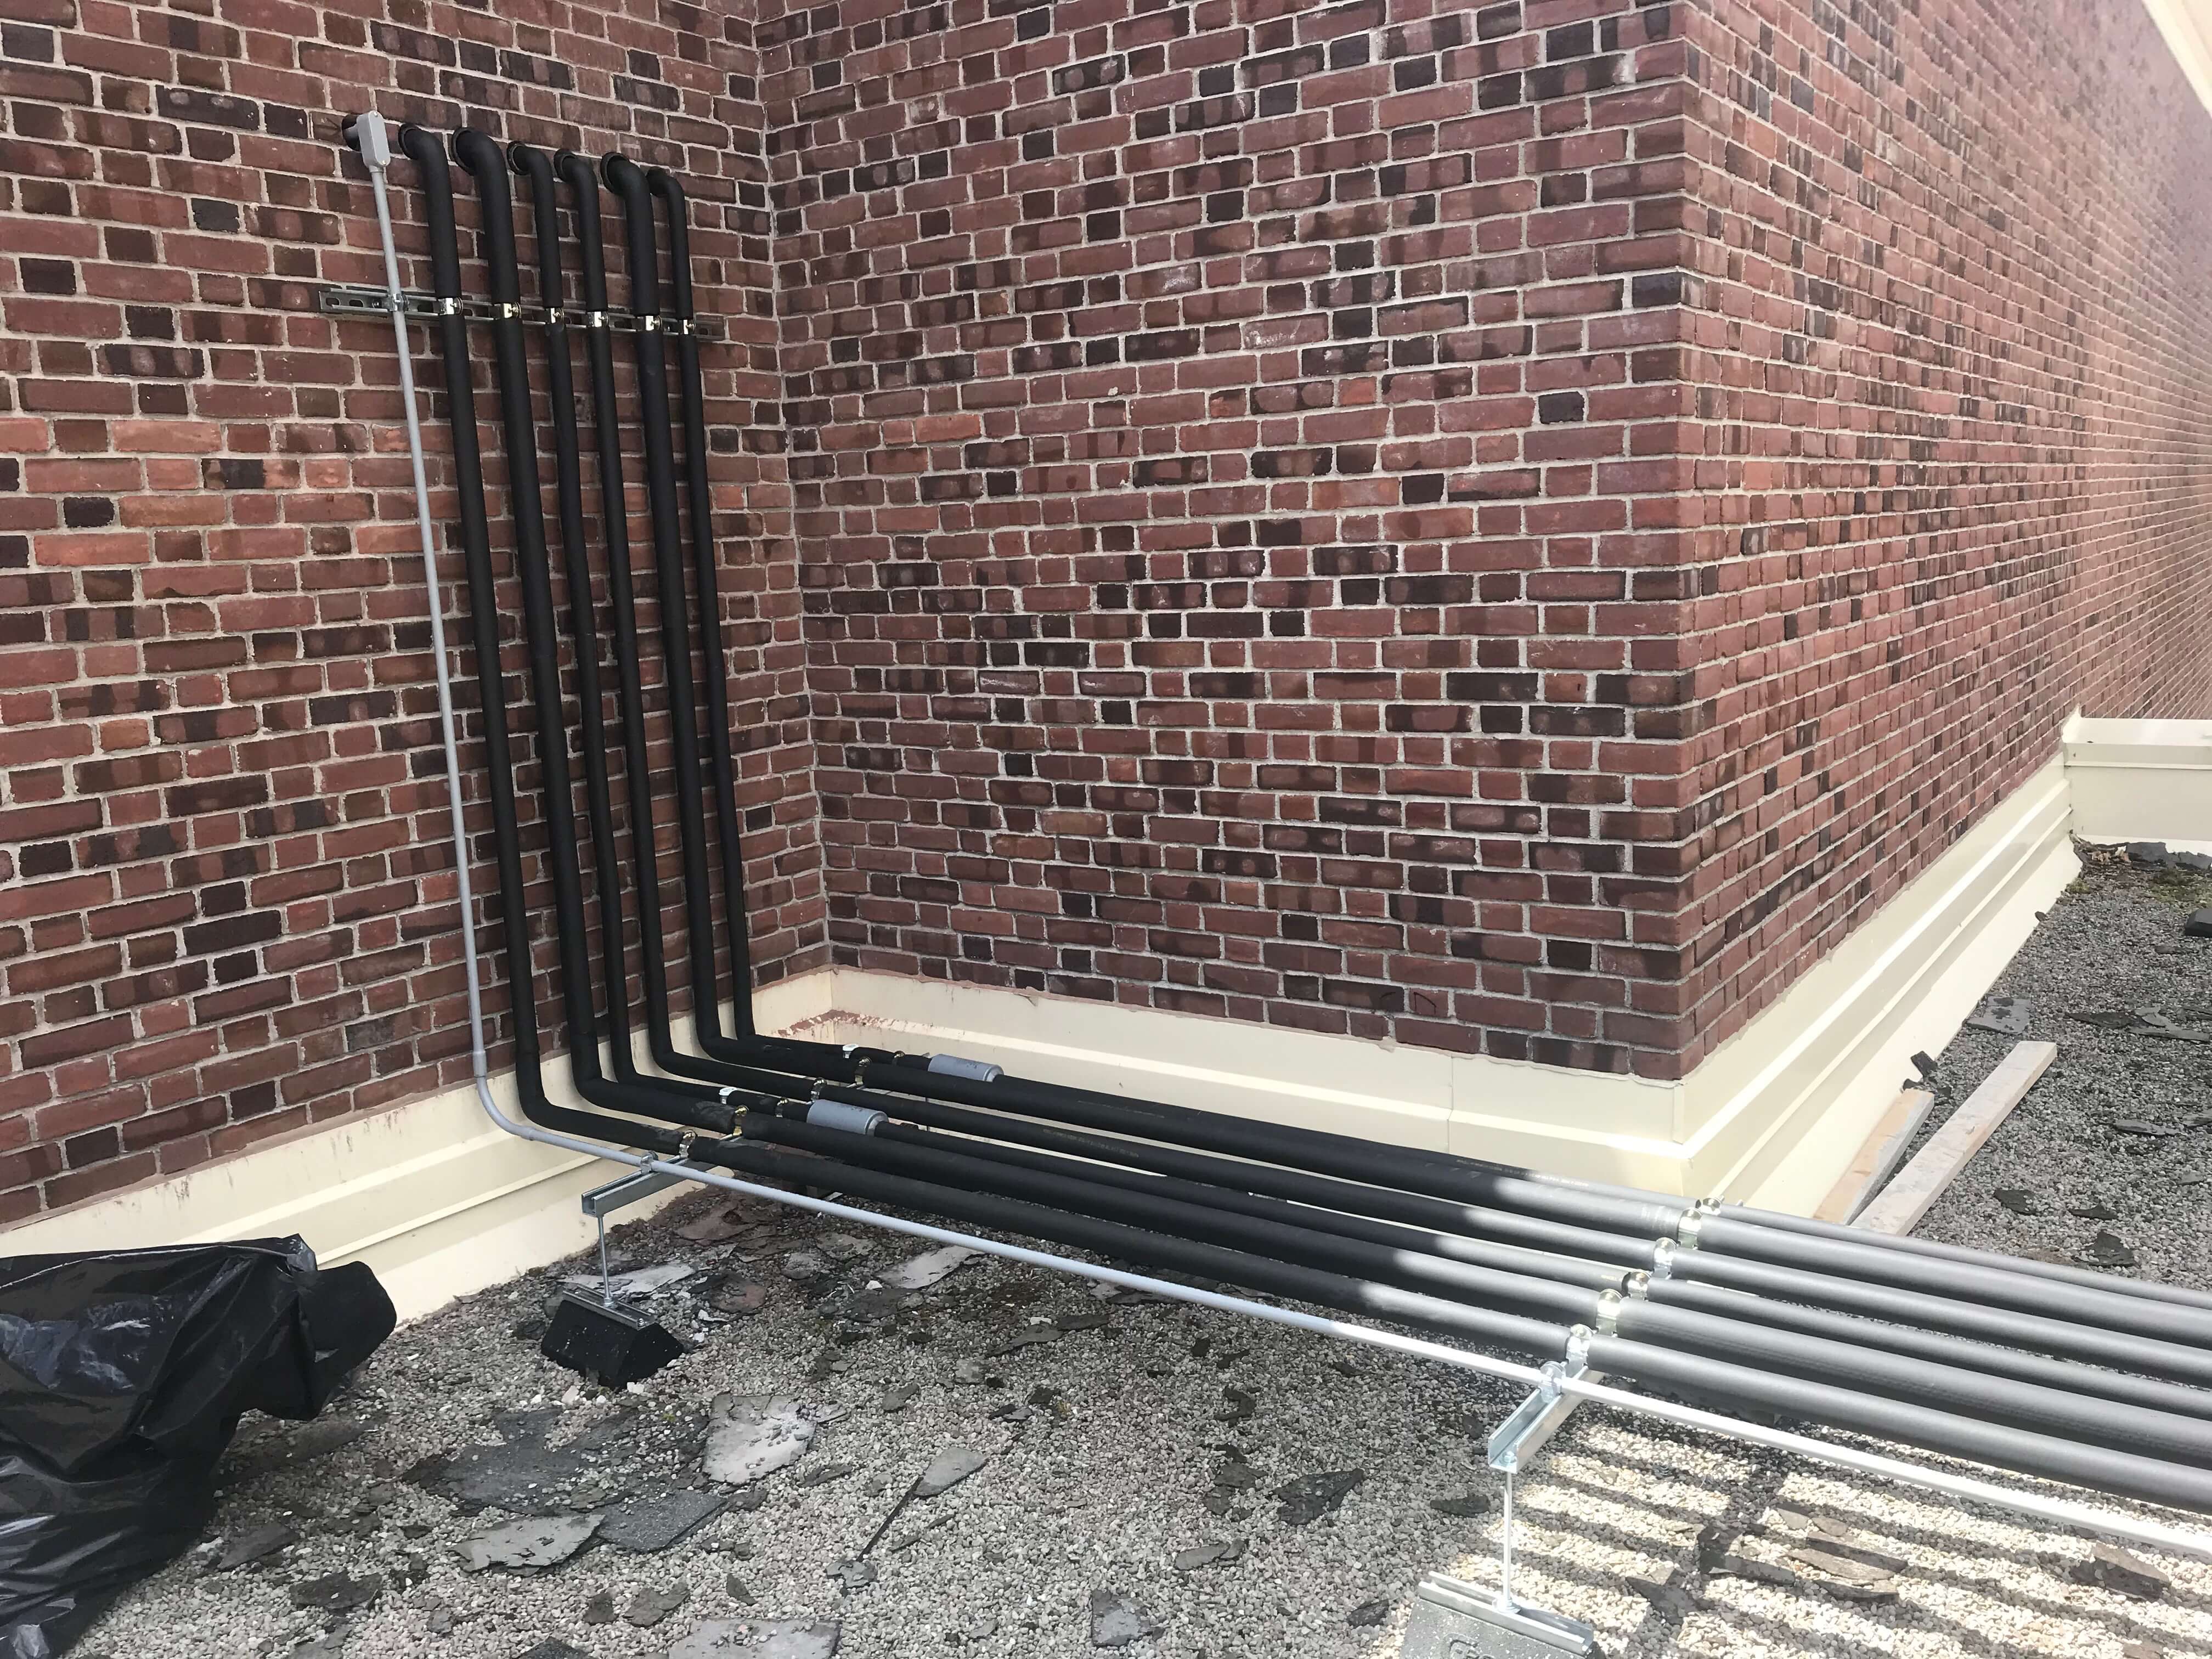 Pipes coming out of brick wall